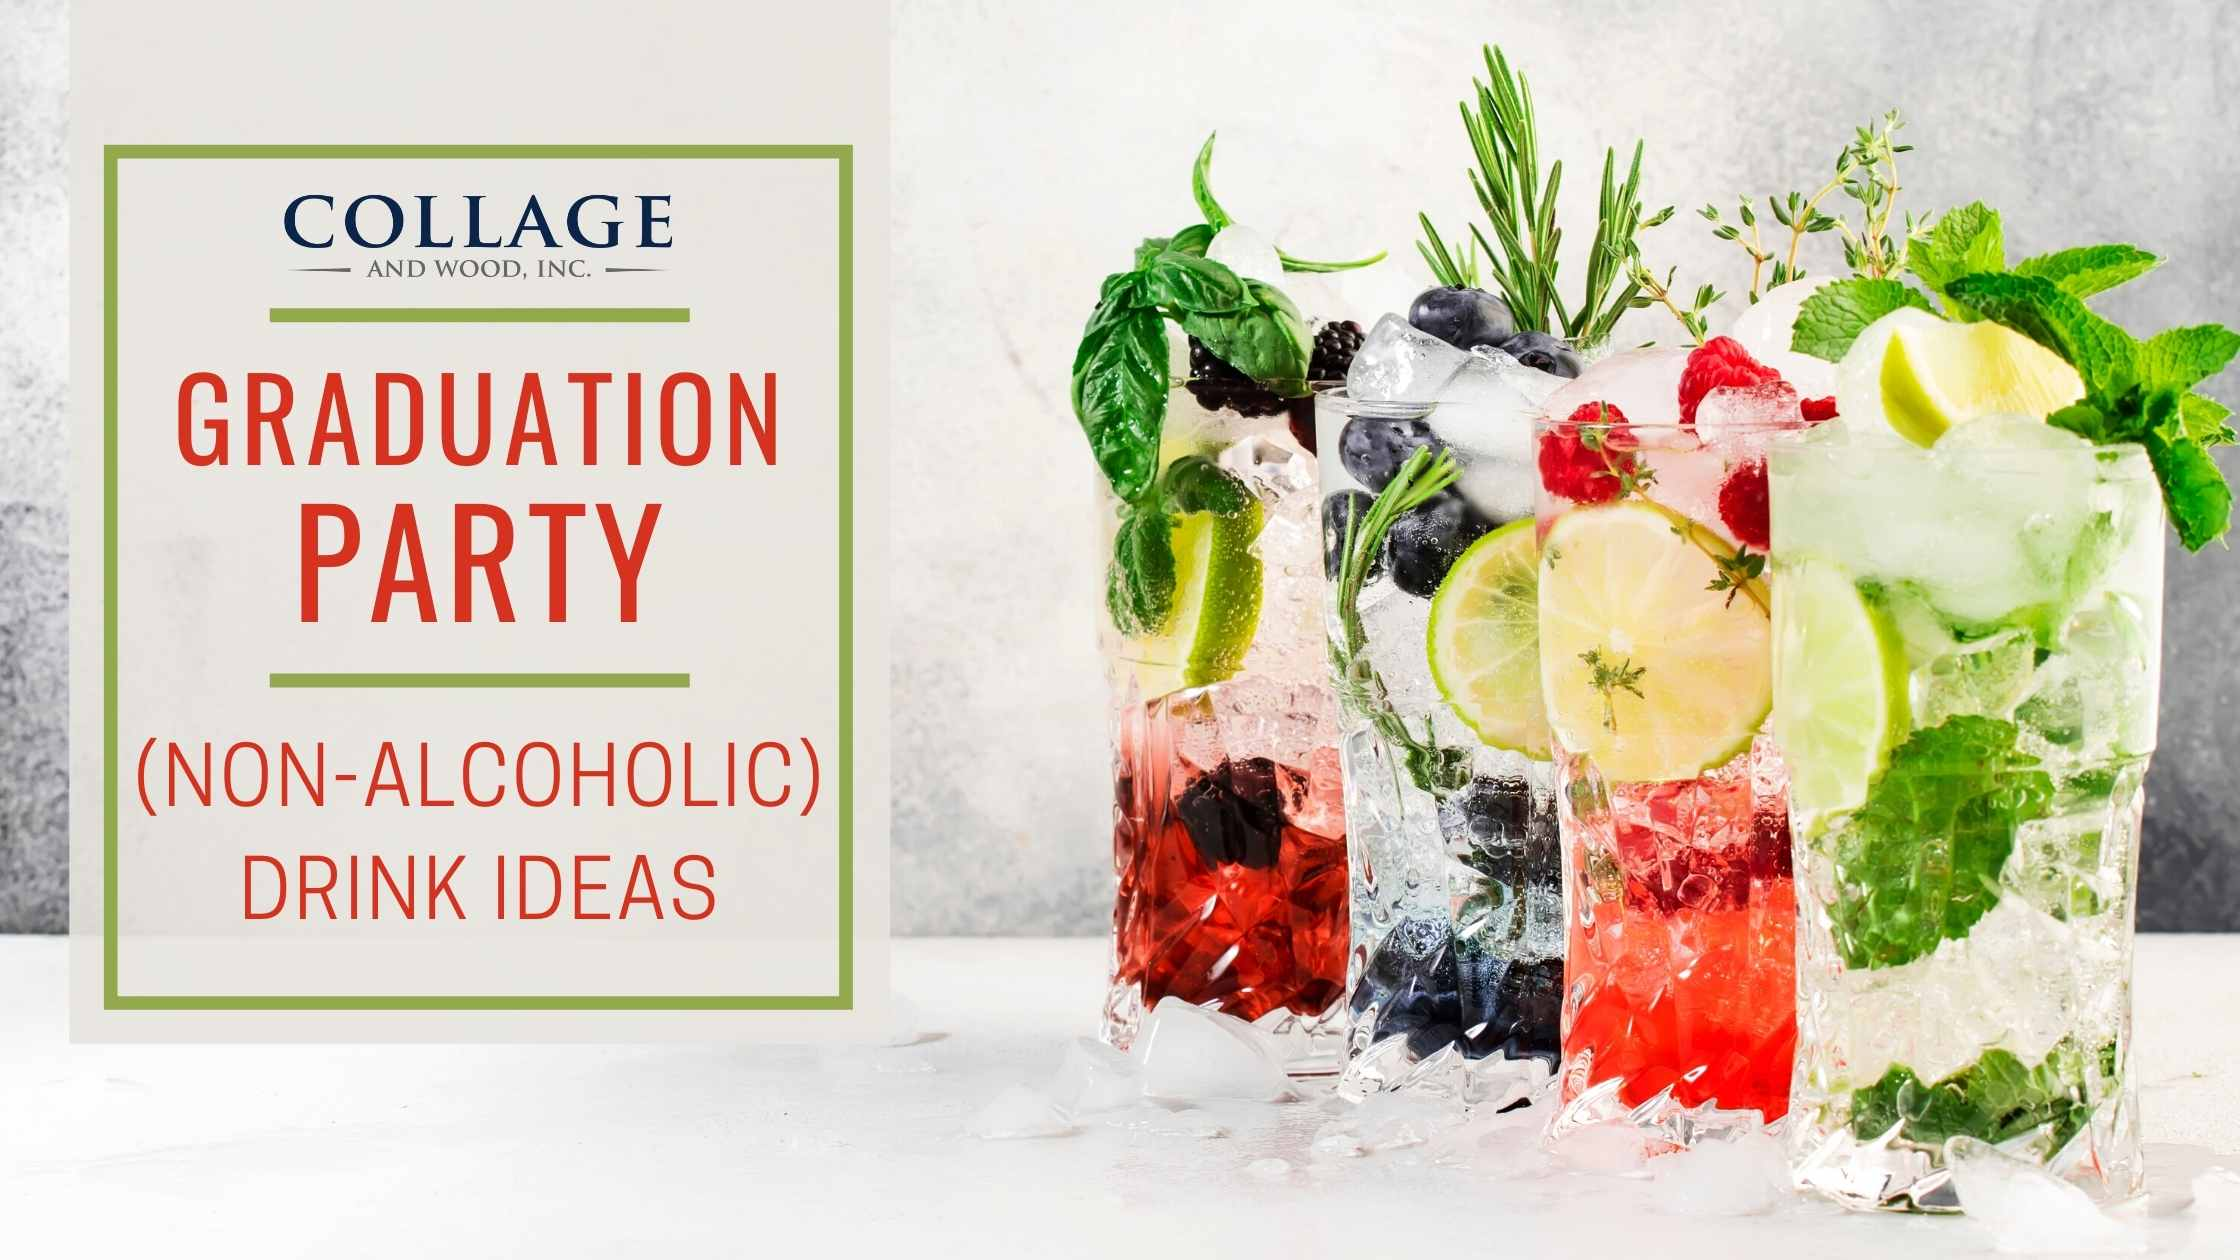 Find or create fun non-alcoholic drinks for the party!